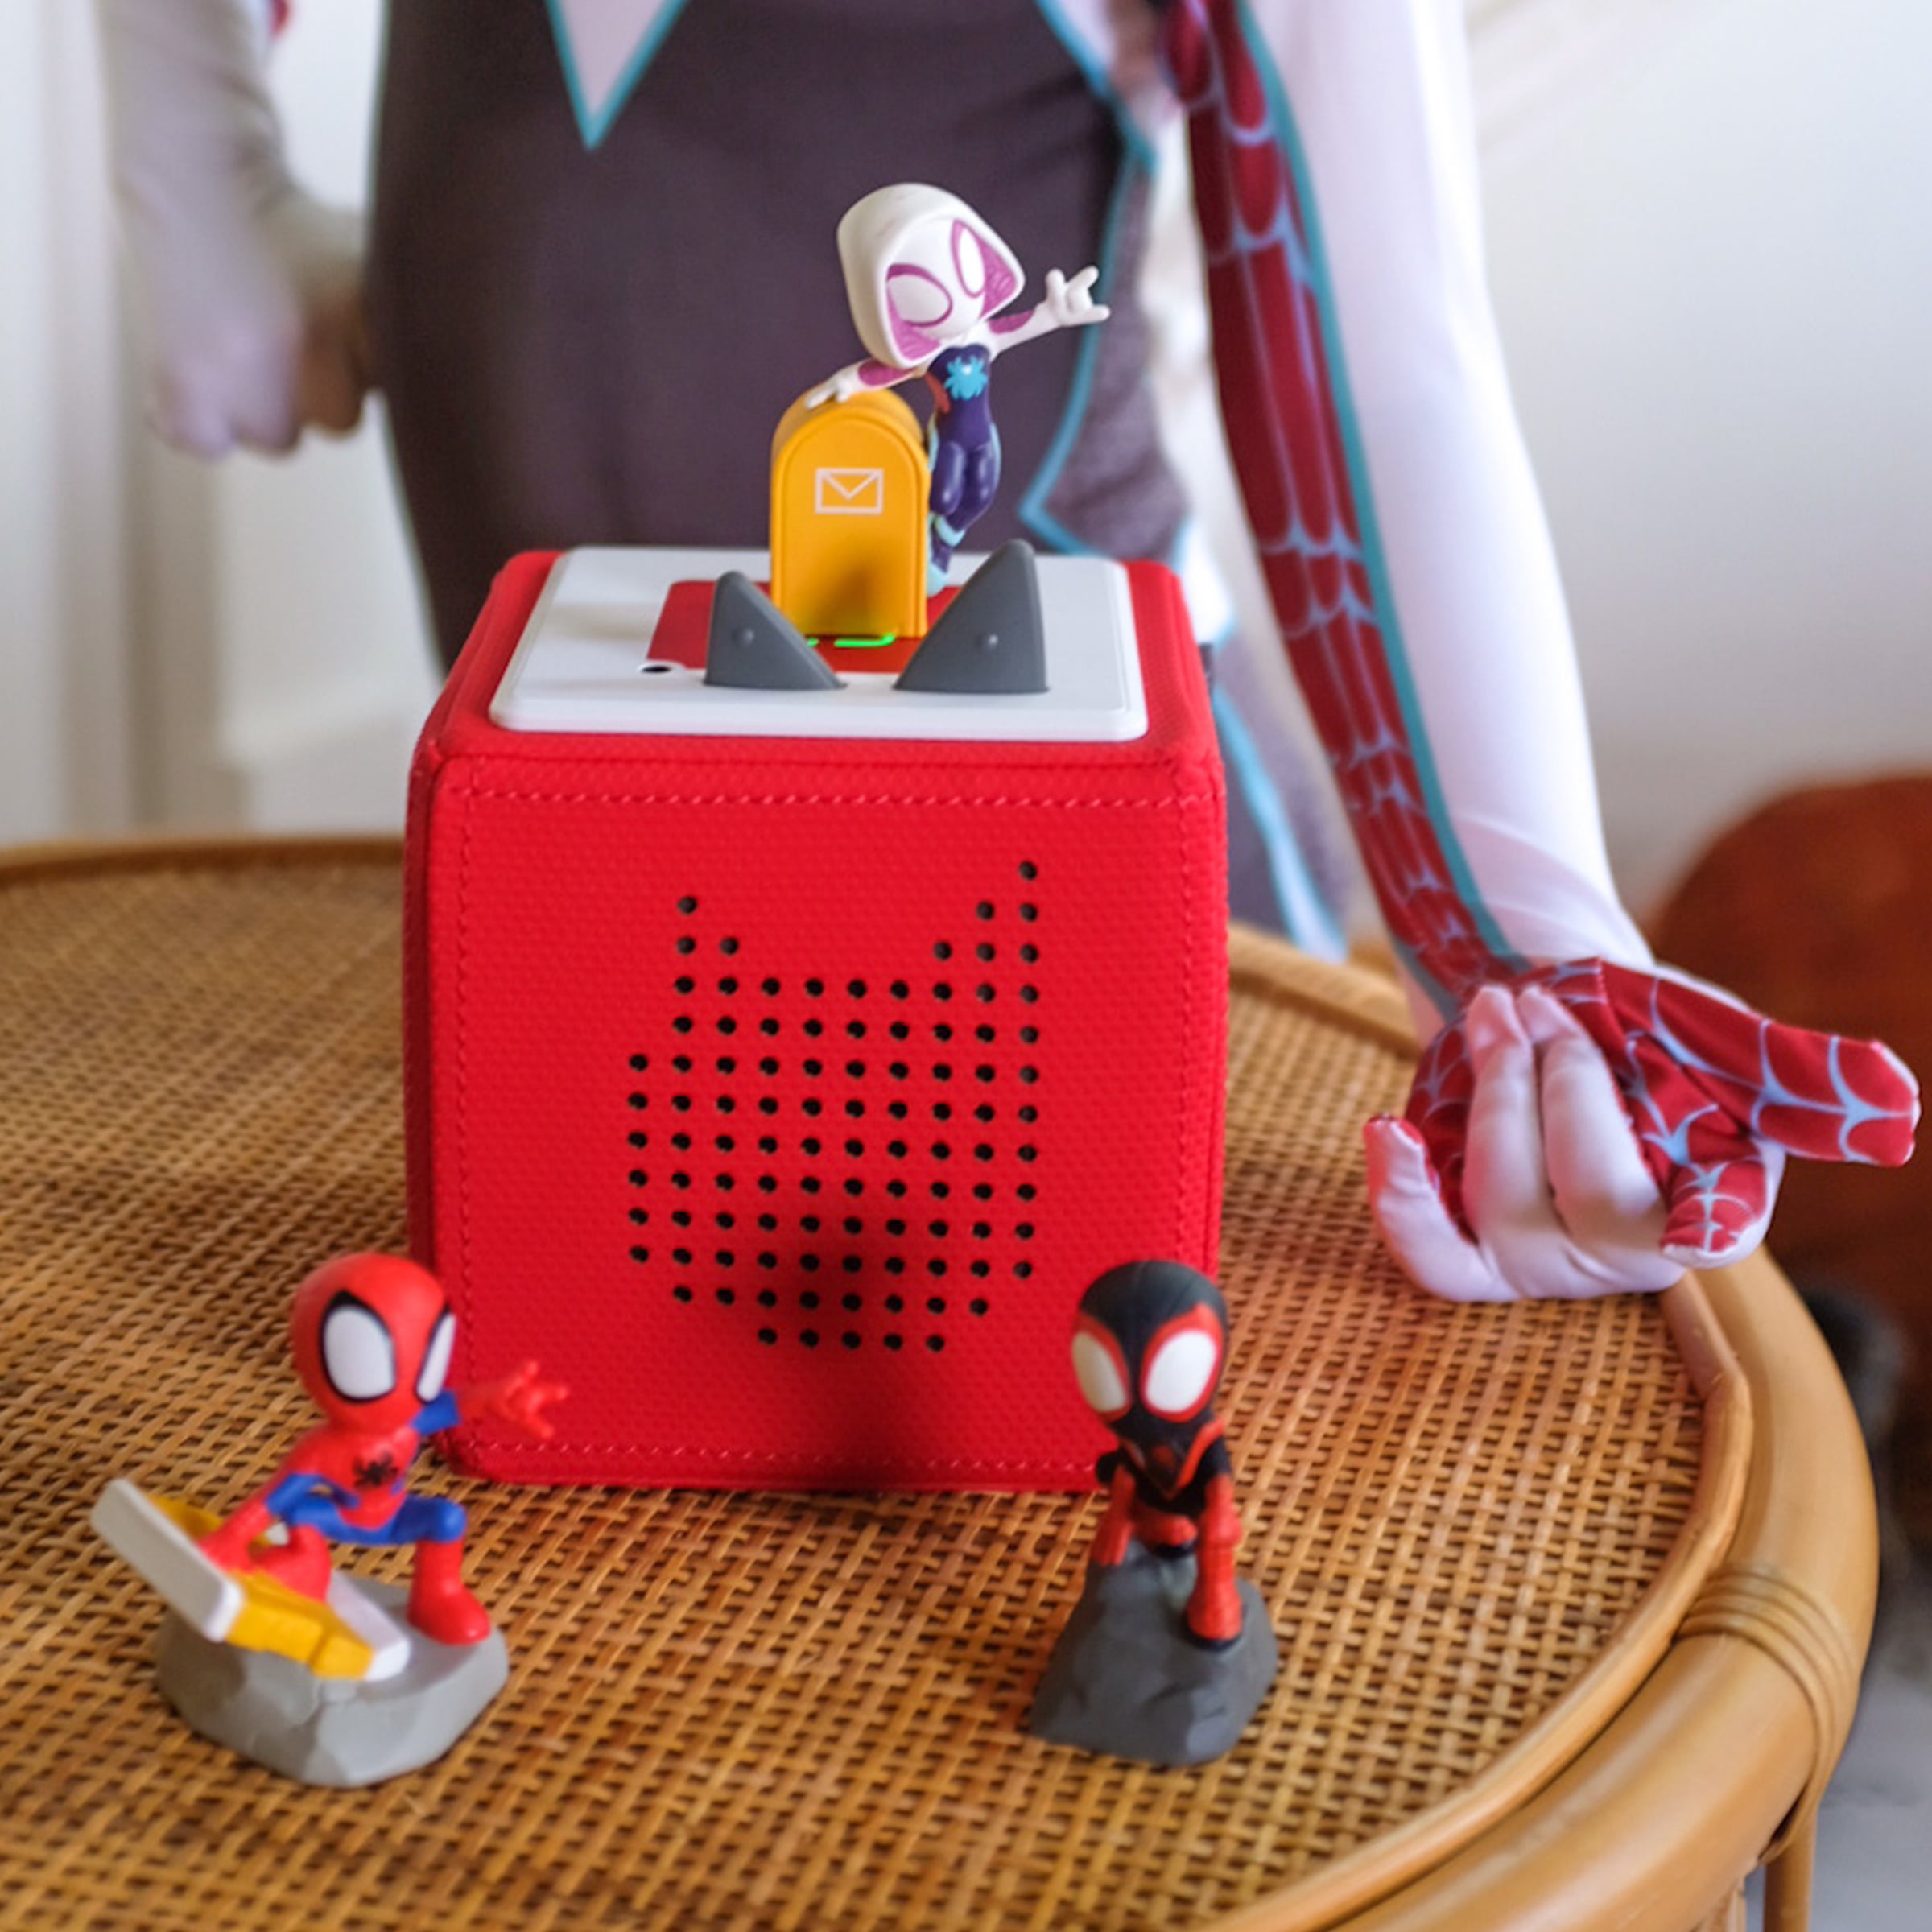 Tonies Spin Audio Play Character from Marvel Spidey and His Amazing Friends